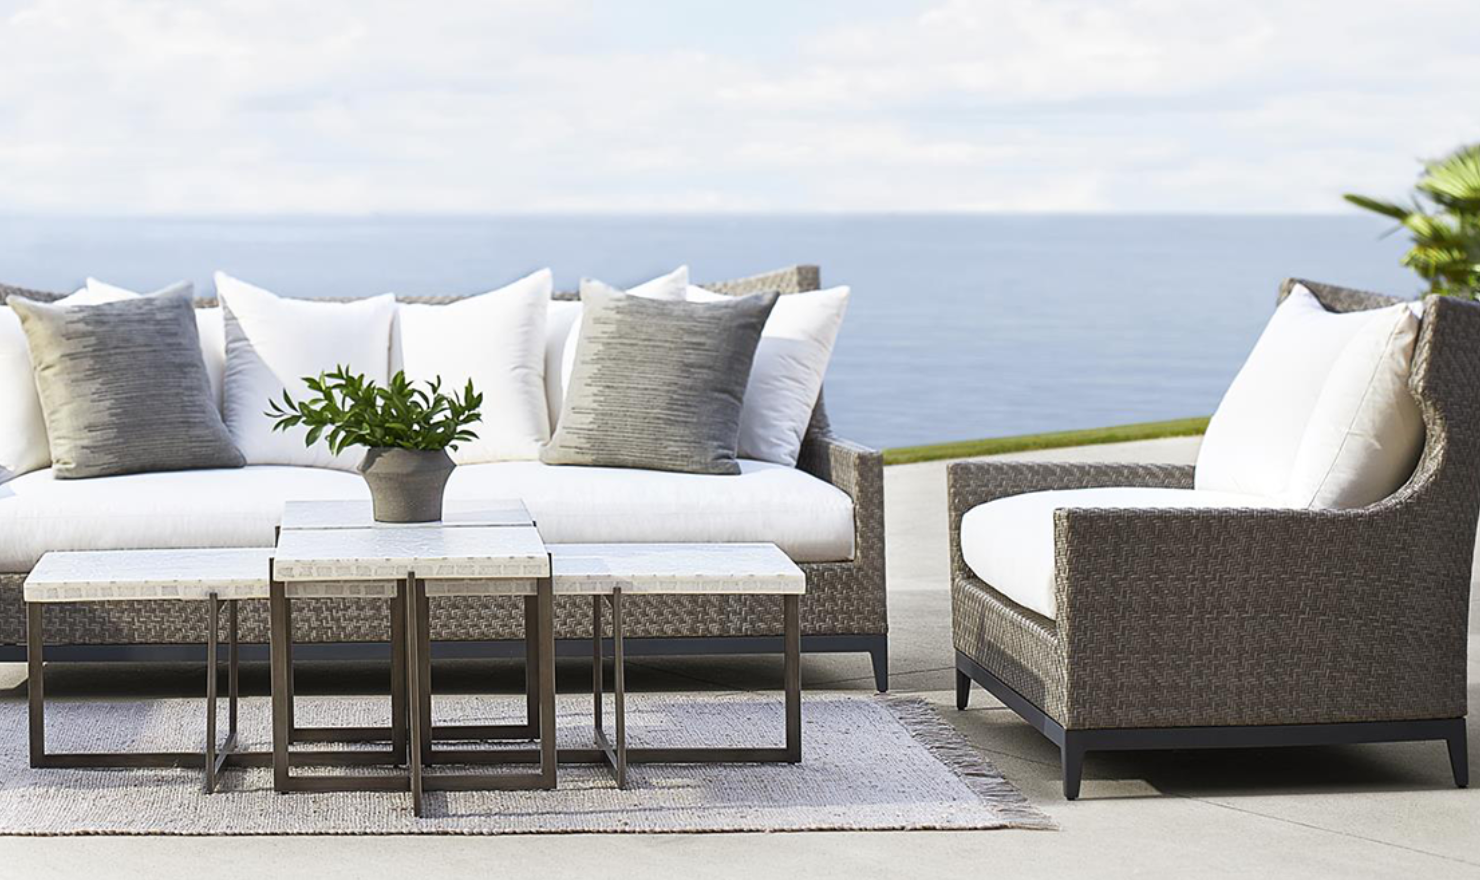 Check The Comfort Of The Patio Seating Furniture